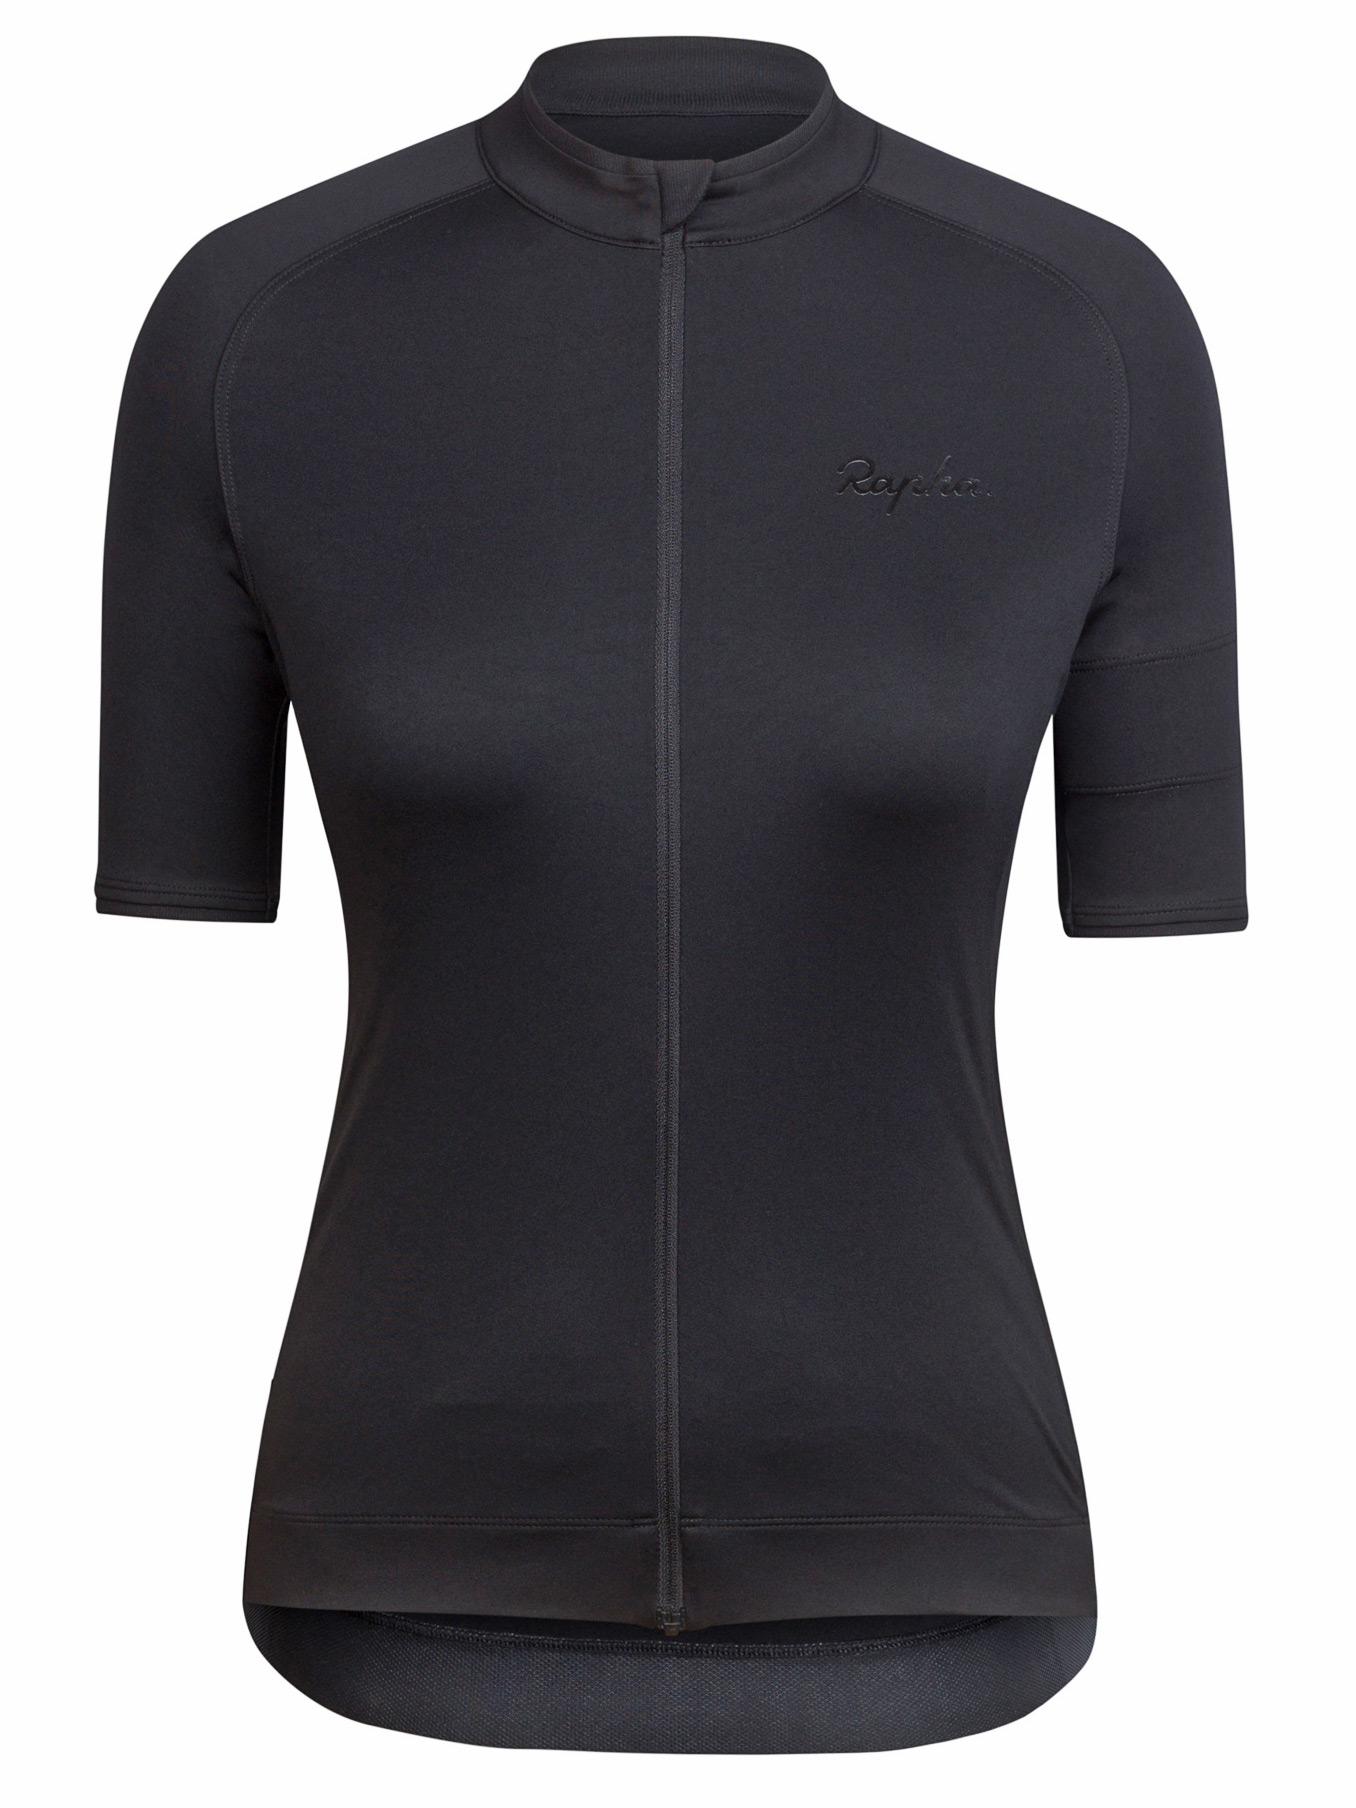 First Look: Rapha moves to bring premium into reach with new Core ...